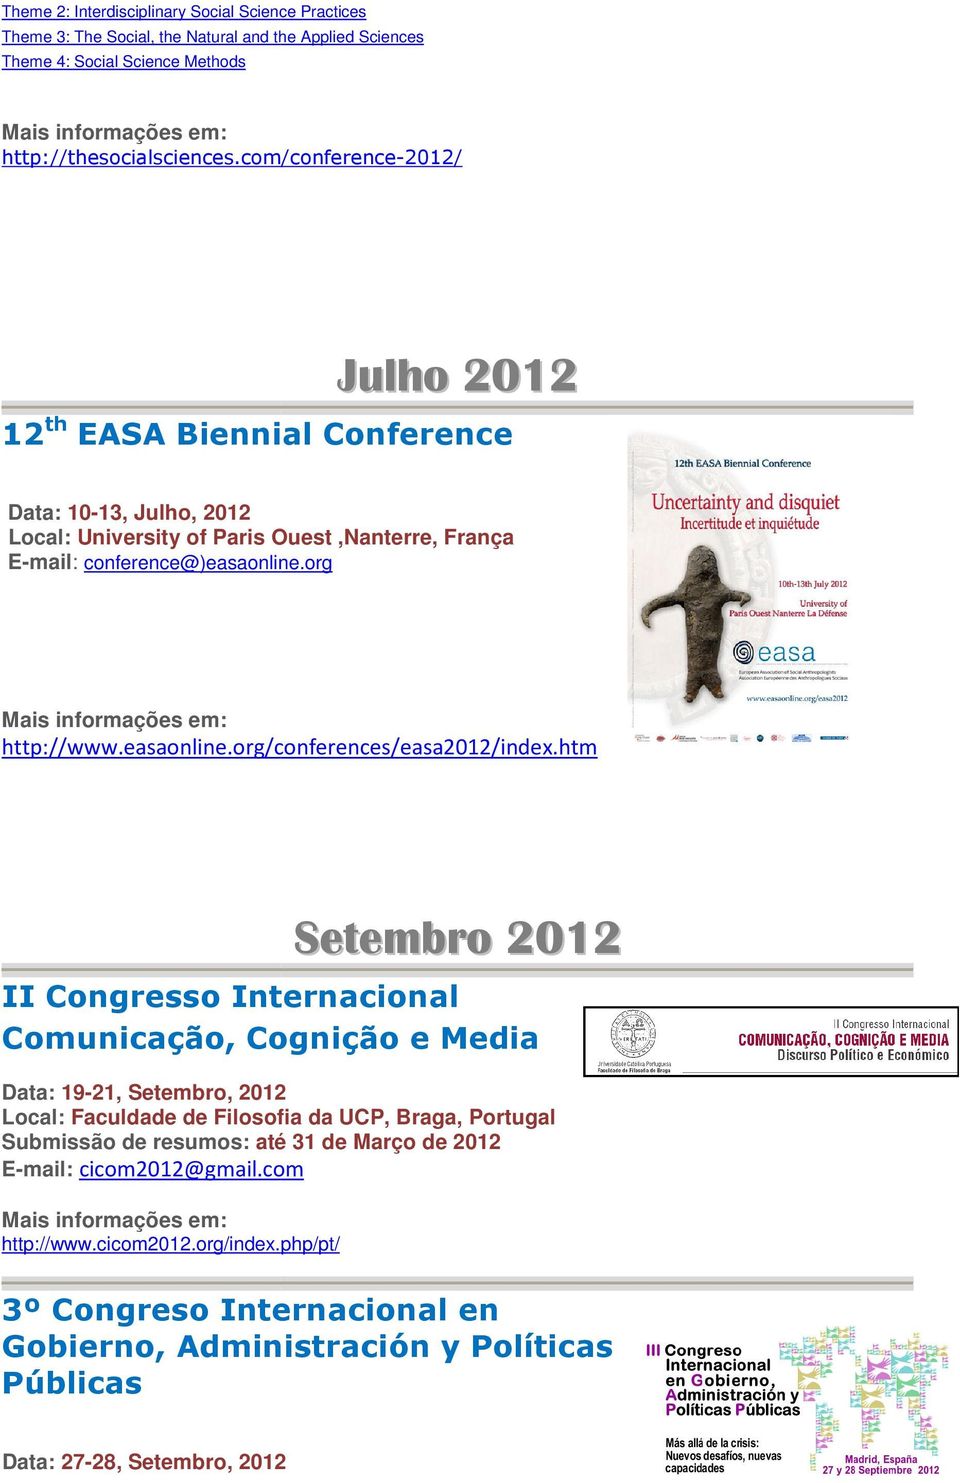 easaonline.org/conferences/easa2012/index.